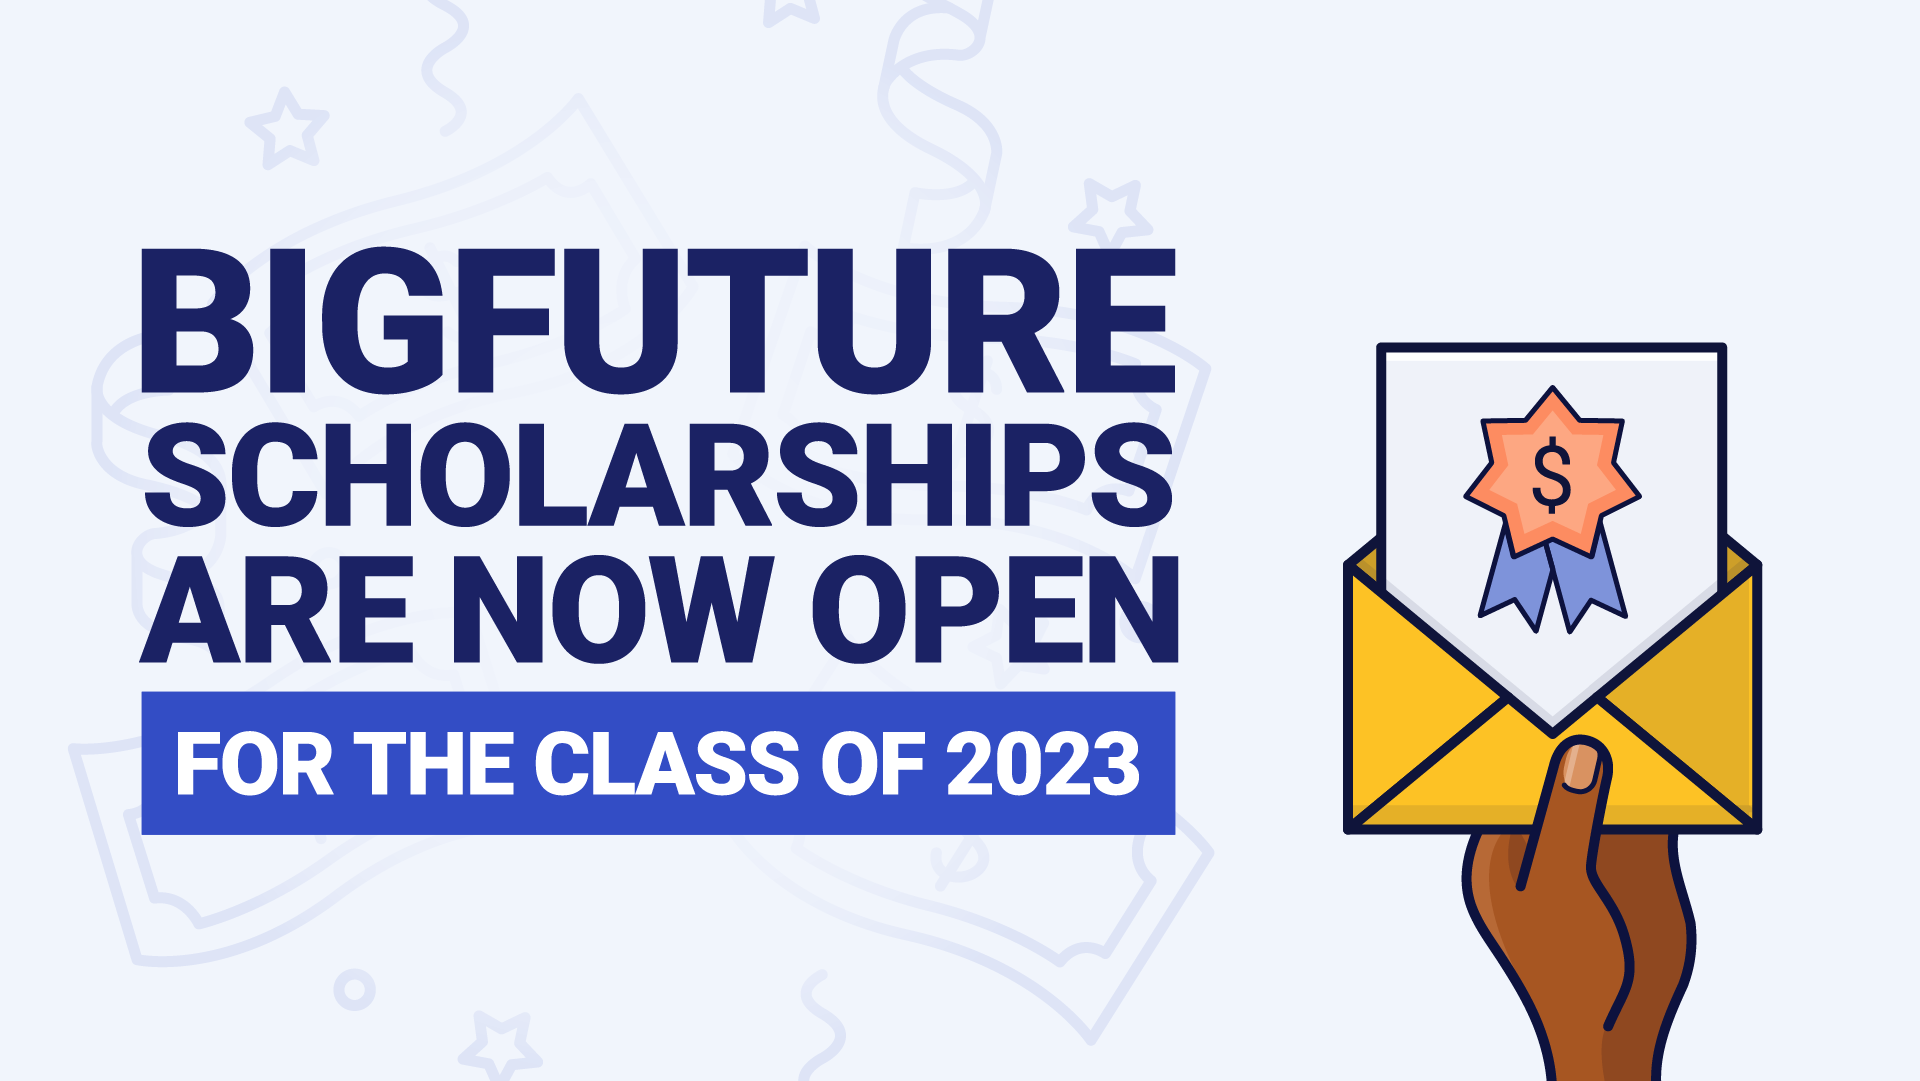 essay scholarships for class of 2023